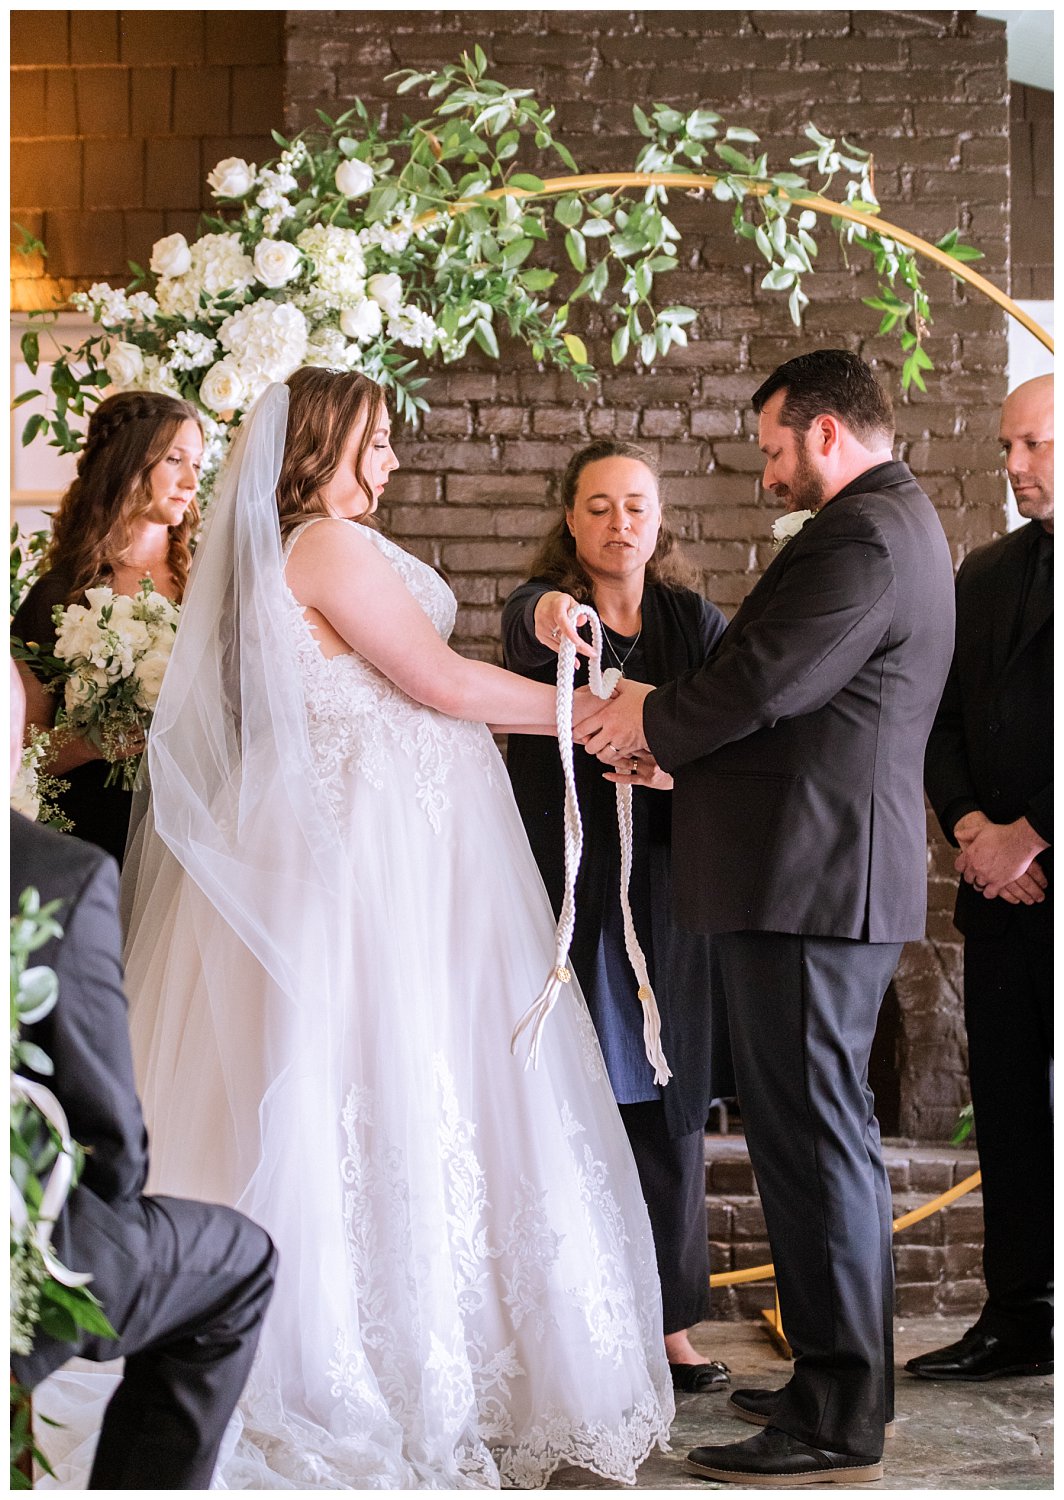 Intimate ceremony at the Clifton Inn in Charlottesville, Virginia